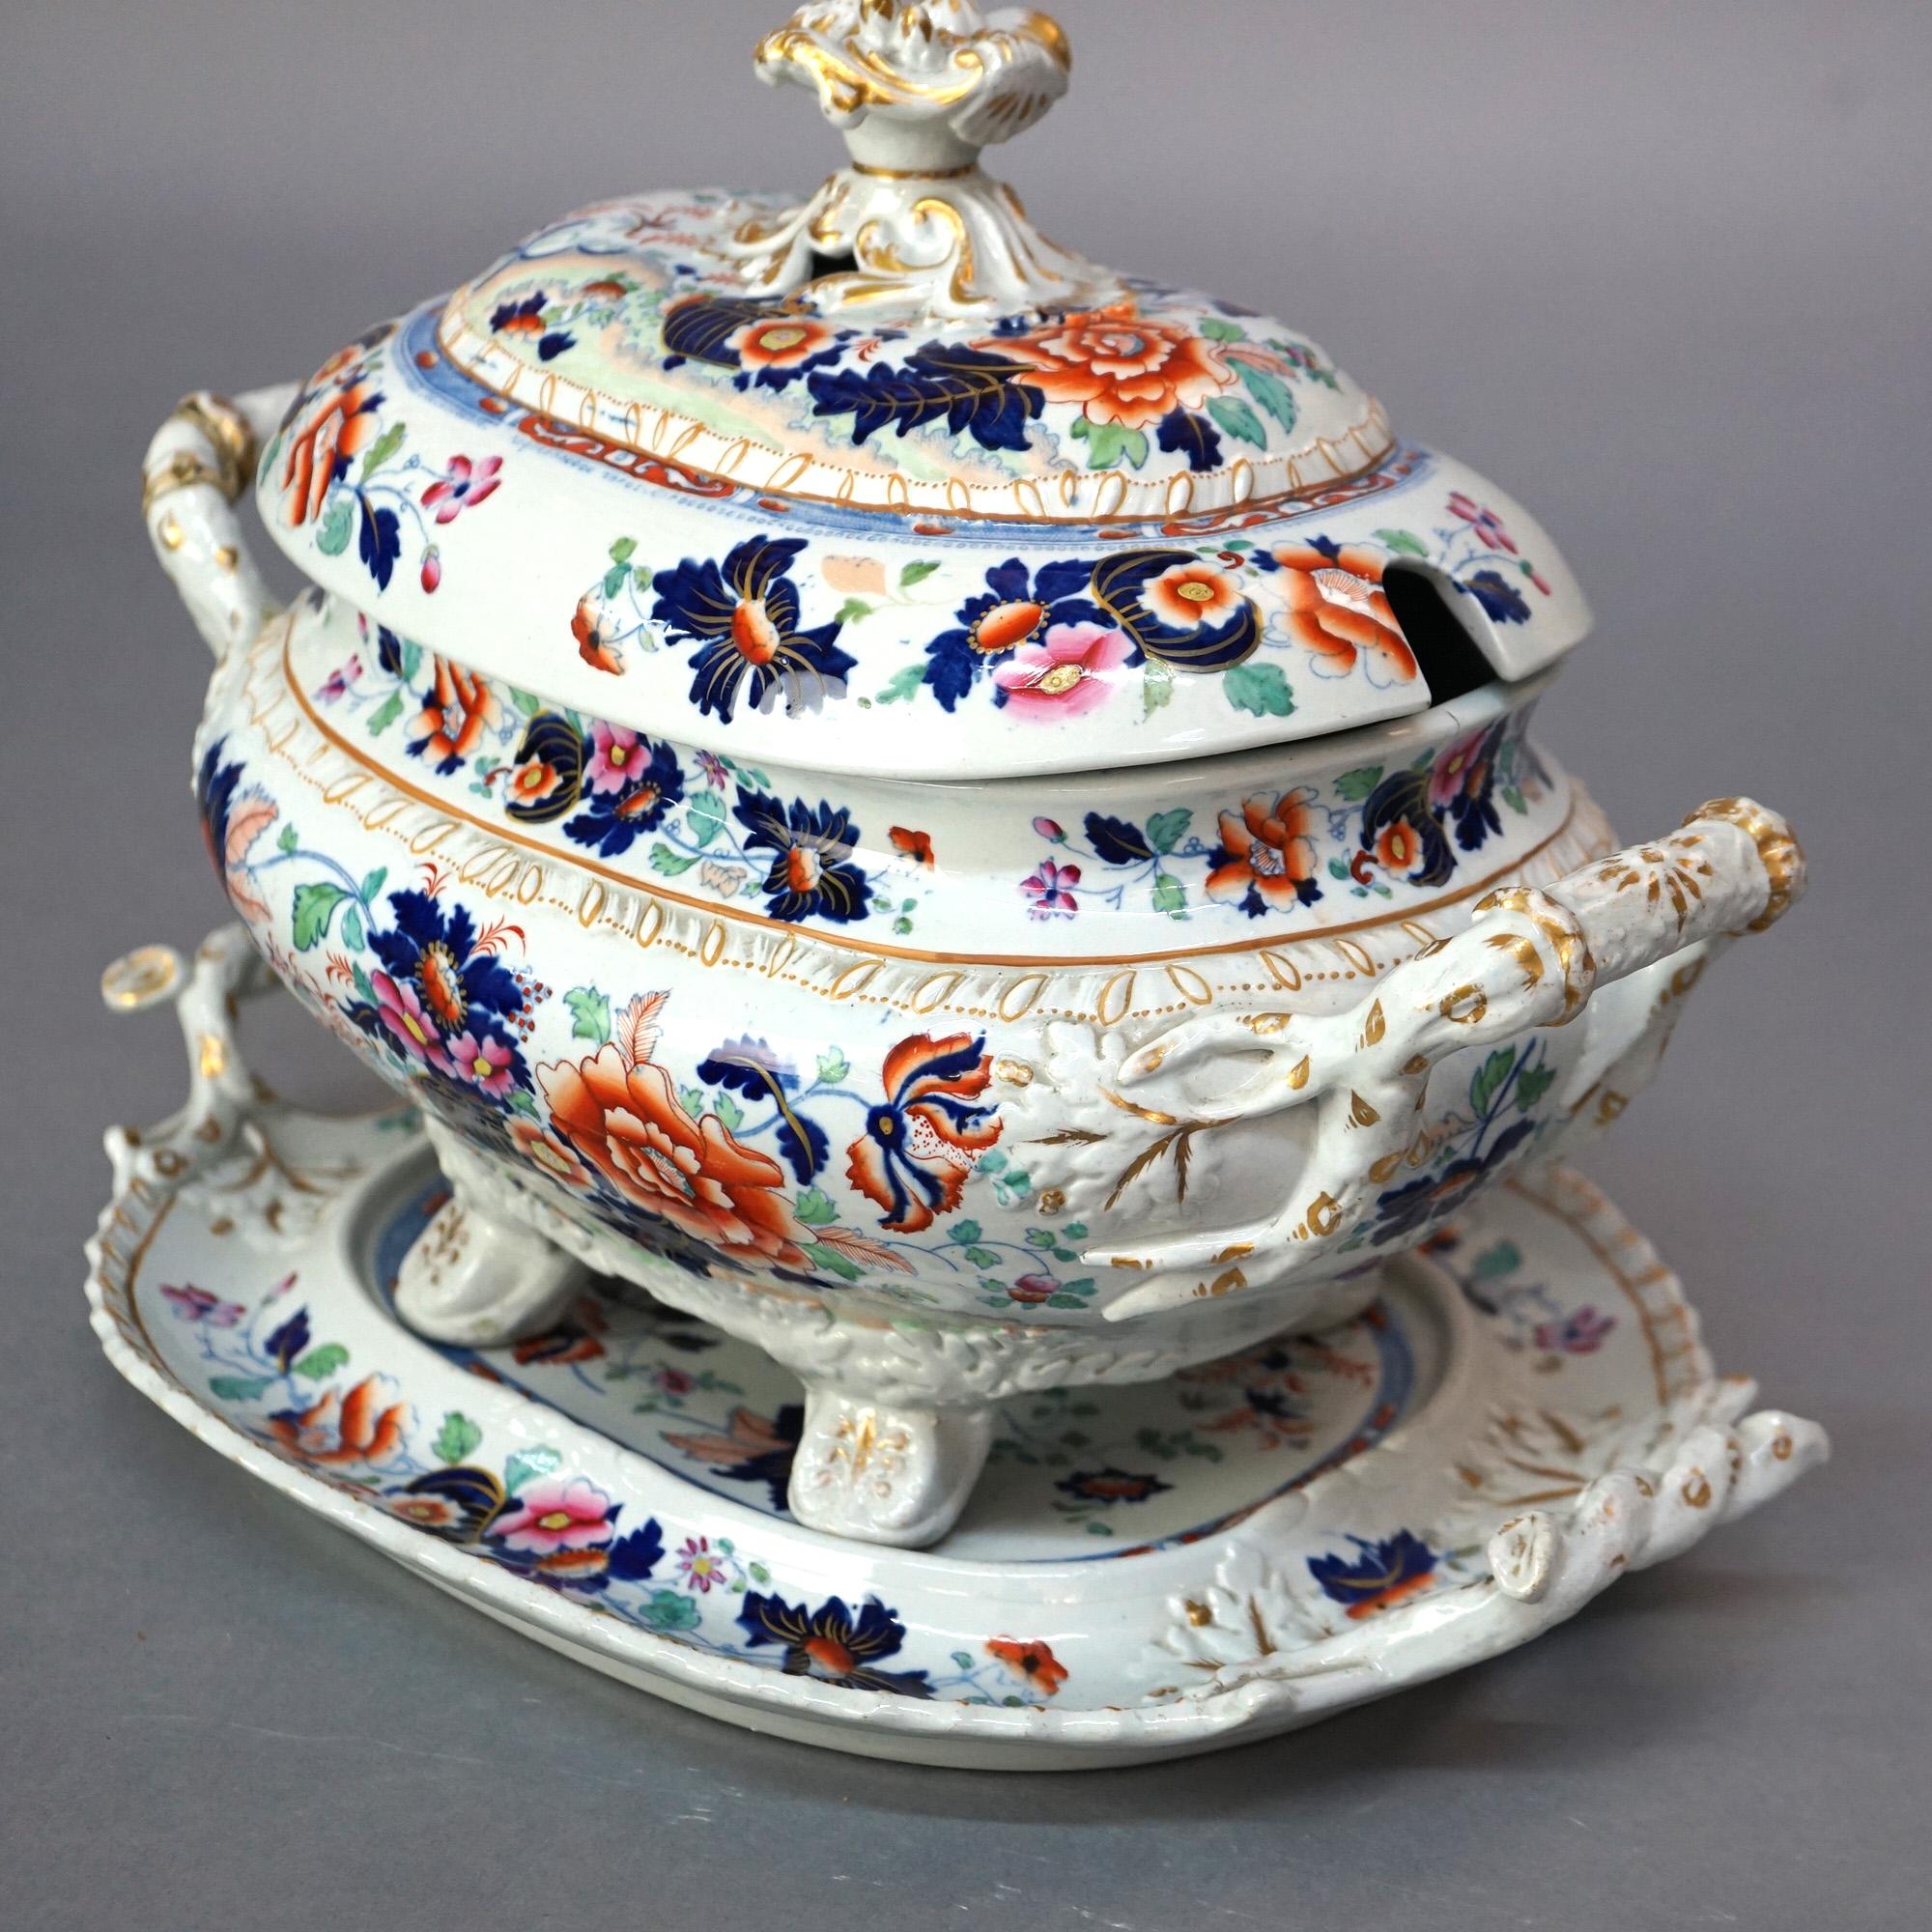 Antique English Imari Hand Painted Floral & Gilt Porcelain Double Handled Lidded and Footed Tureen & Underplate C1900

Measures- 11.5''H x 15''W x 10''D